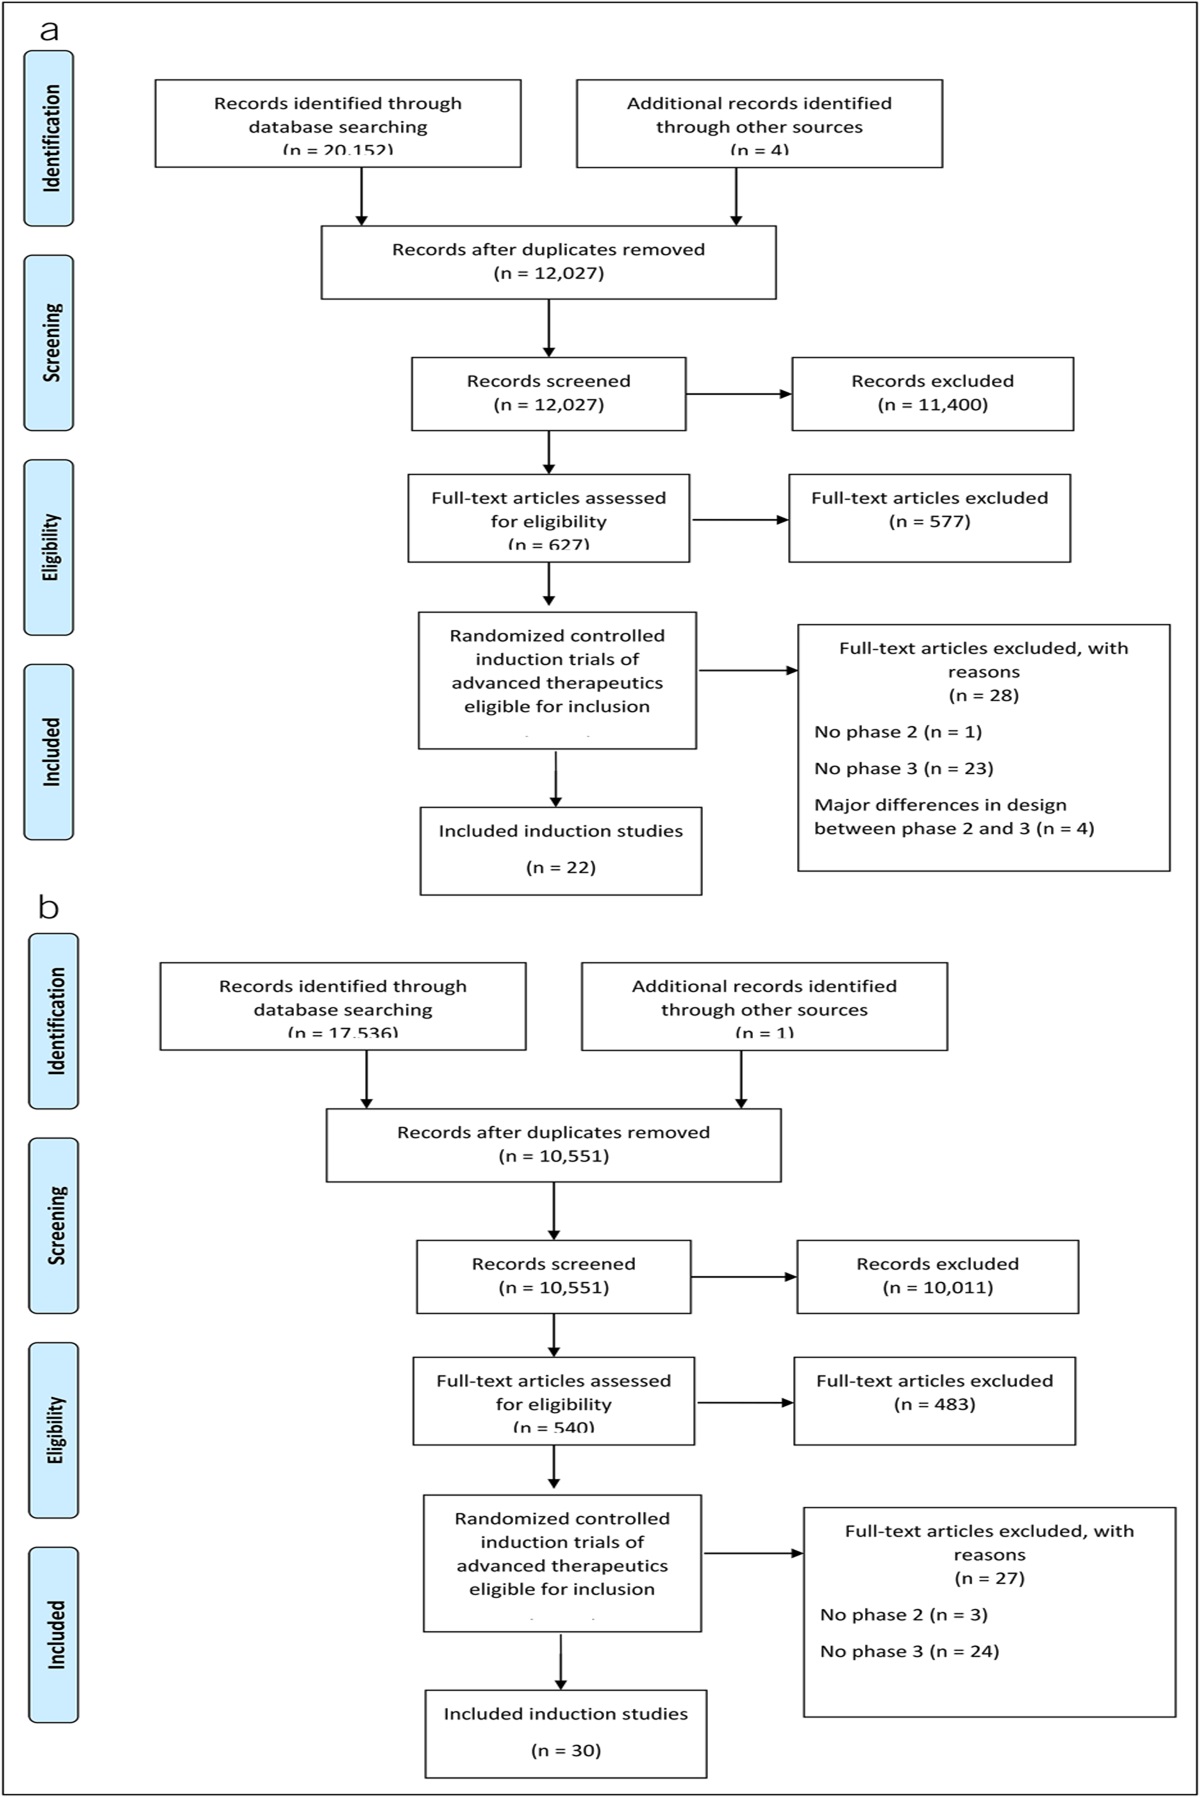 A Comparison of Treatment Effect Sizes in Matched Phase 2 and Phase 3 Trials of Advanced Therapeutics in Inflammatory Bowel Disease: Systematic Review and Meta-Analysis